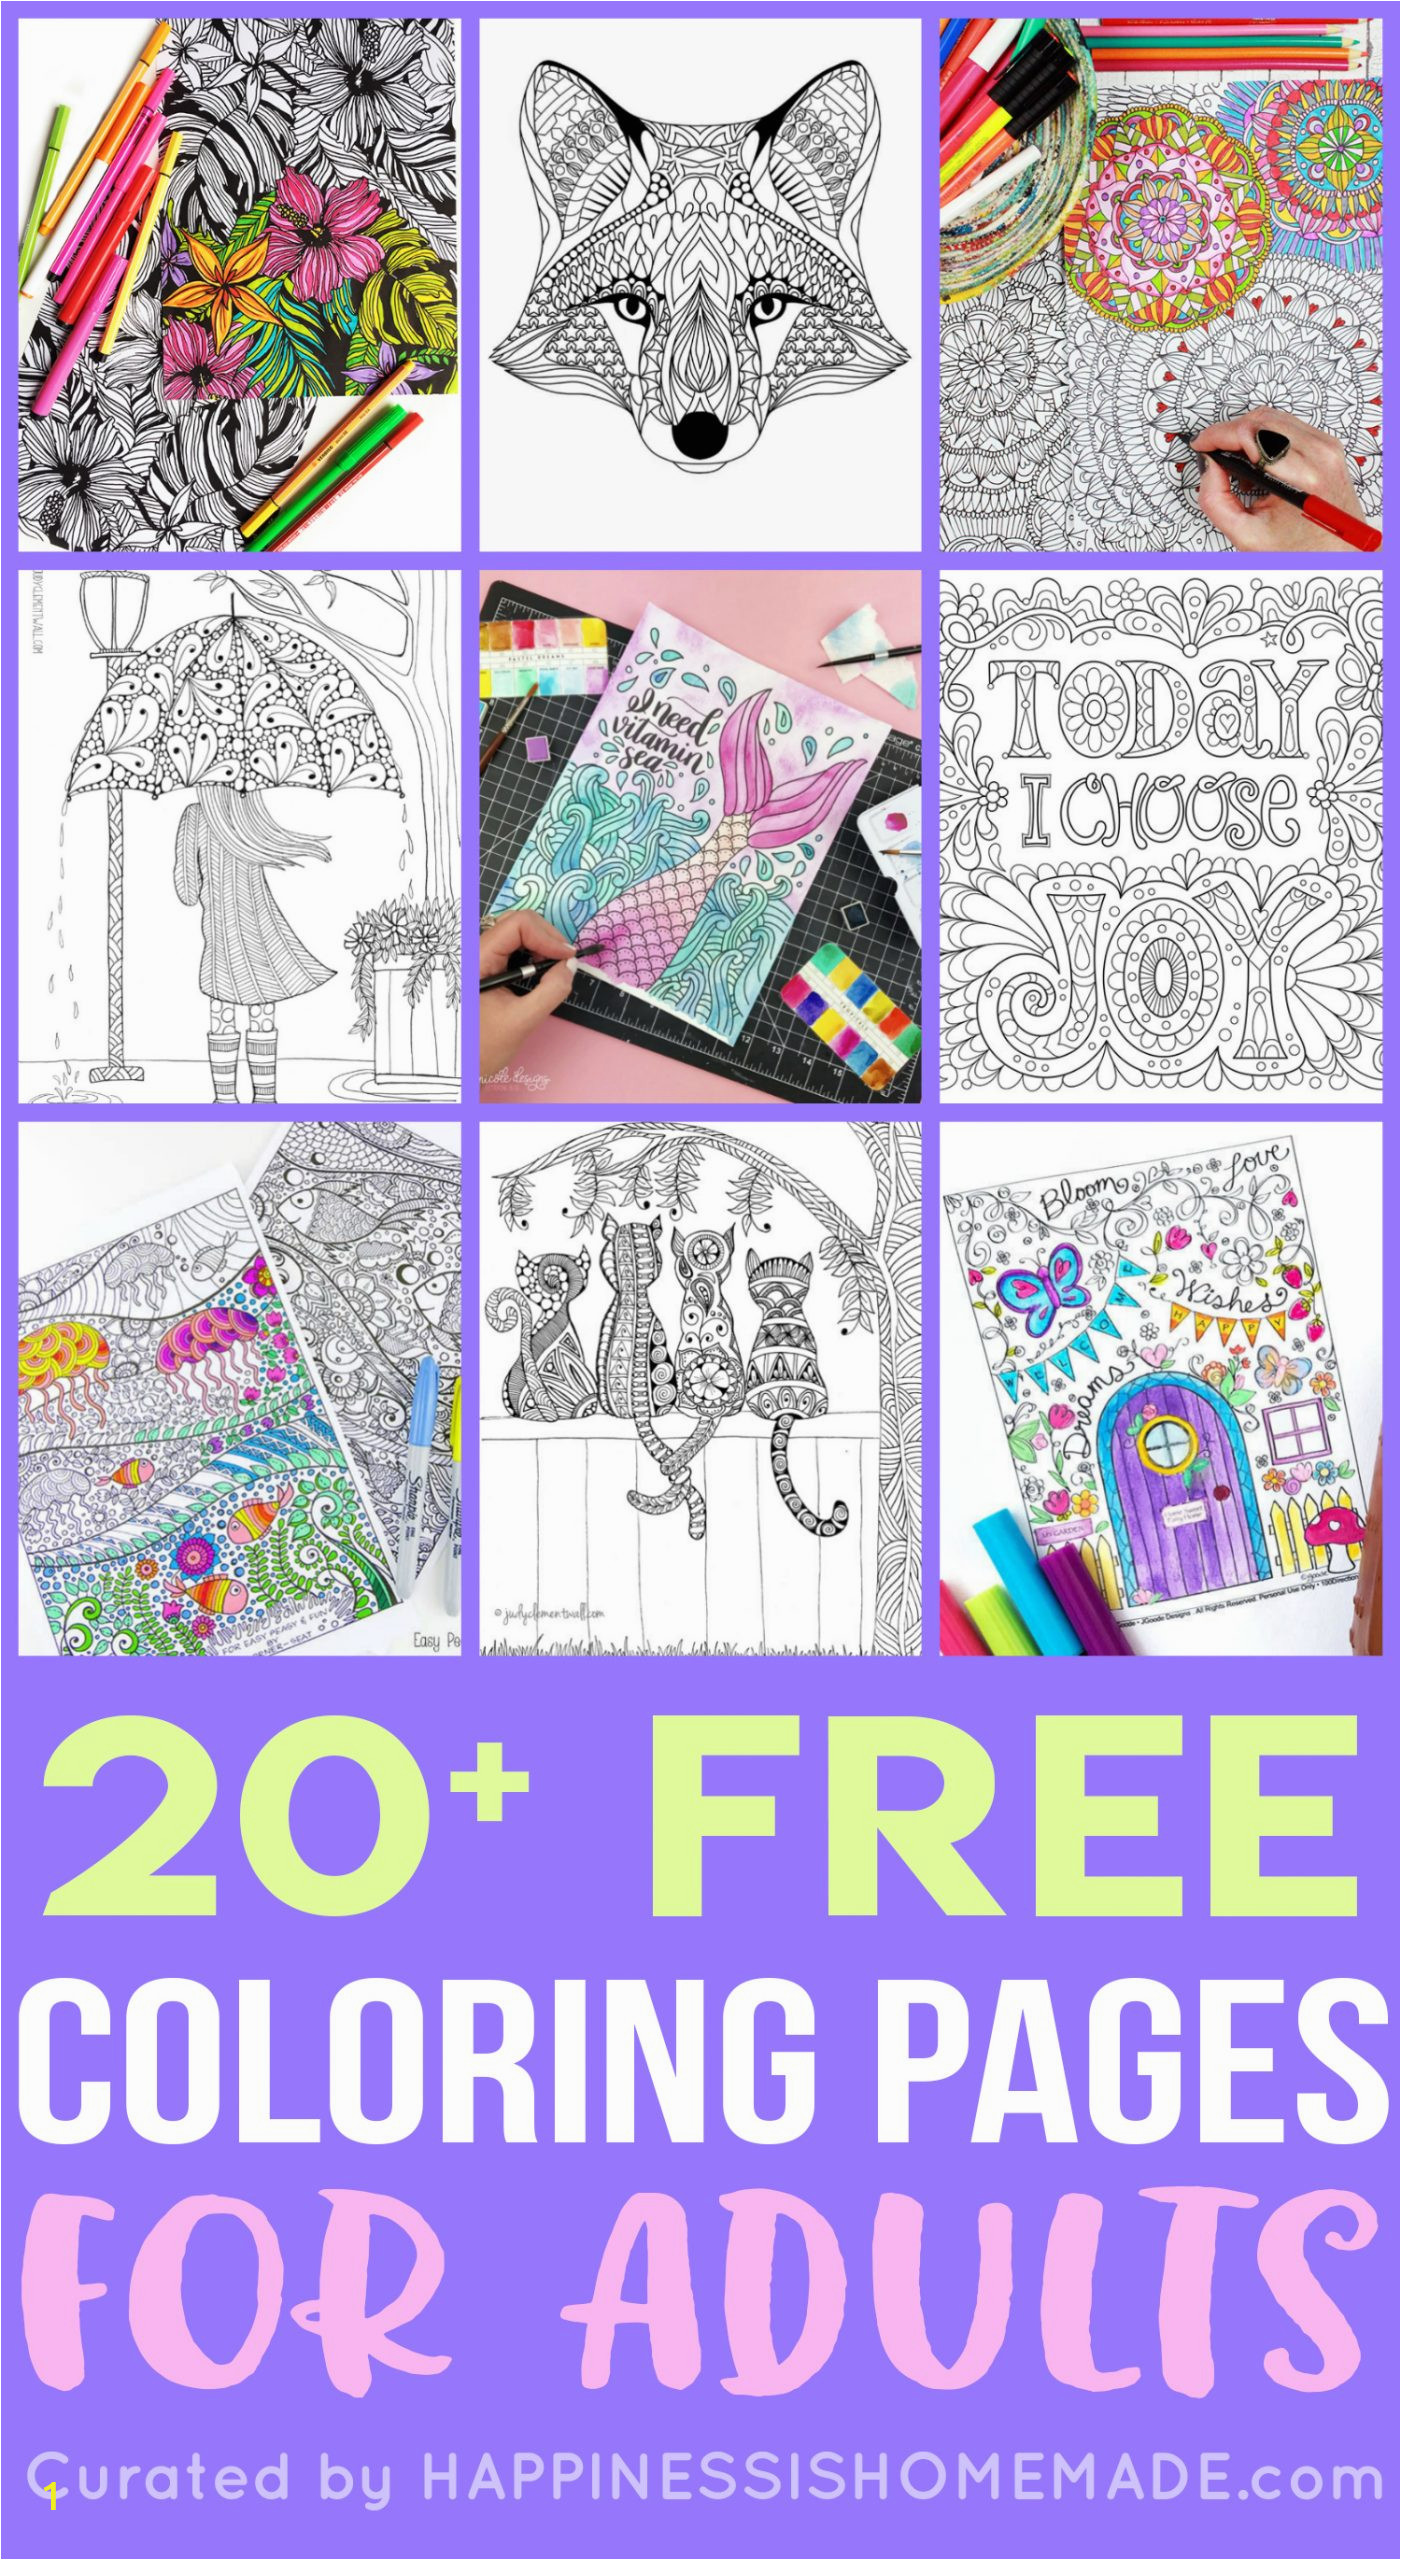 cool coloring books for kids arkham knight pages baseball book coral reef page kindness mermaid jojo mindfulness colouring printable dltk with quotes adults star trek plex labyrinth scaled